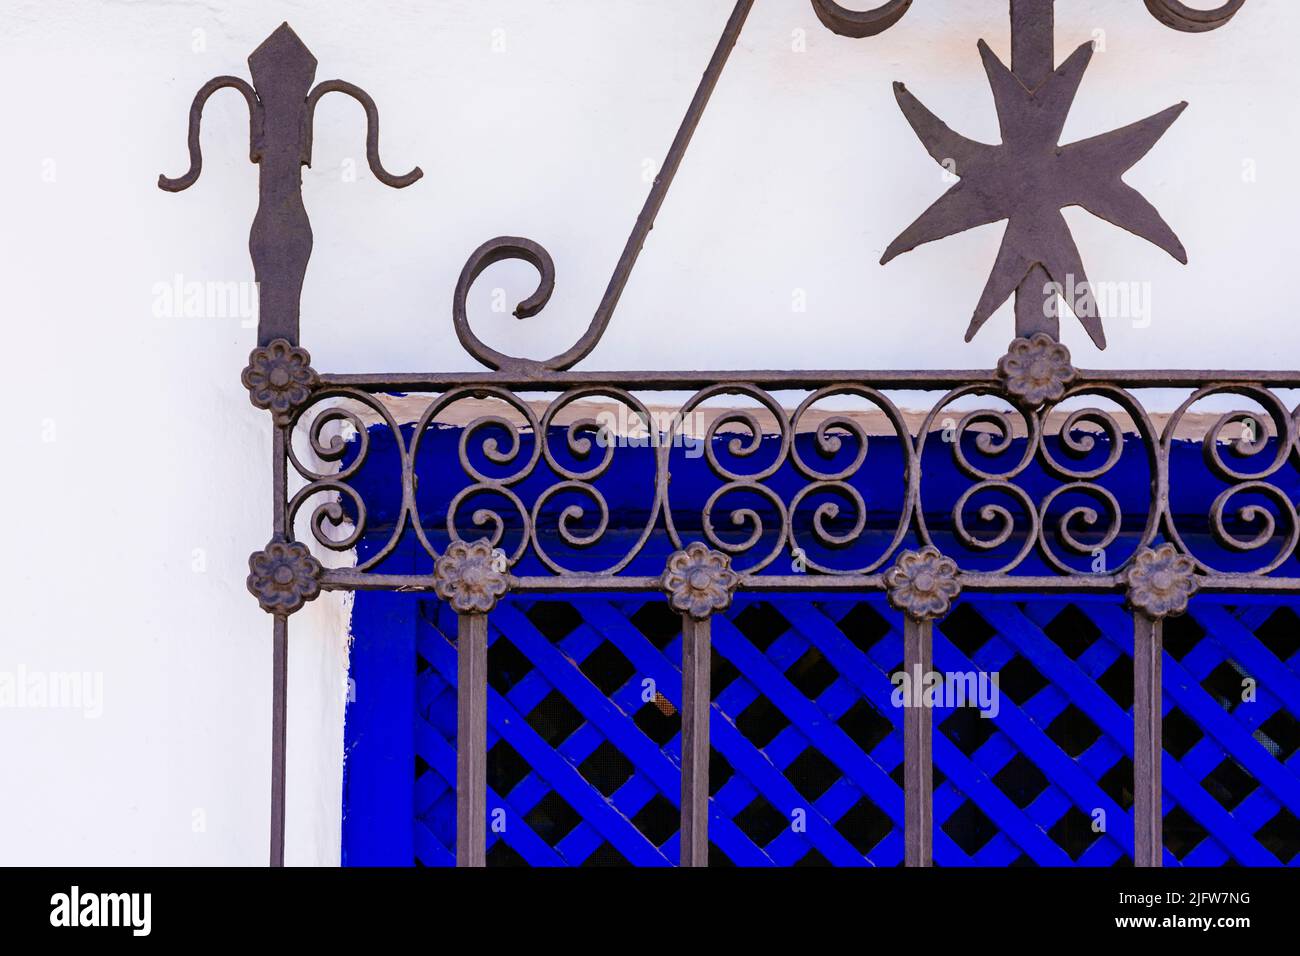 https://c8.alamy.com/comp/2JFW7NG/typical-window-with-iron-grill-puerto-lpice-ciudad-real-castilla-la-mancha-spain-europe-2JFW7NG.jpg